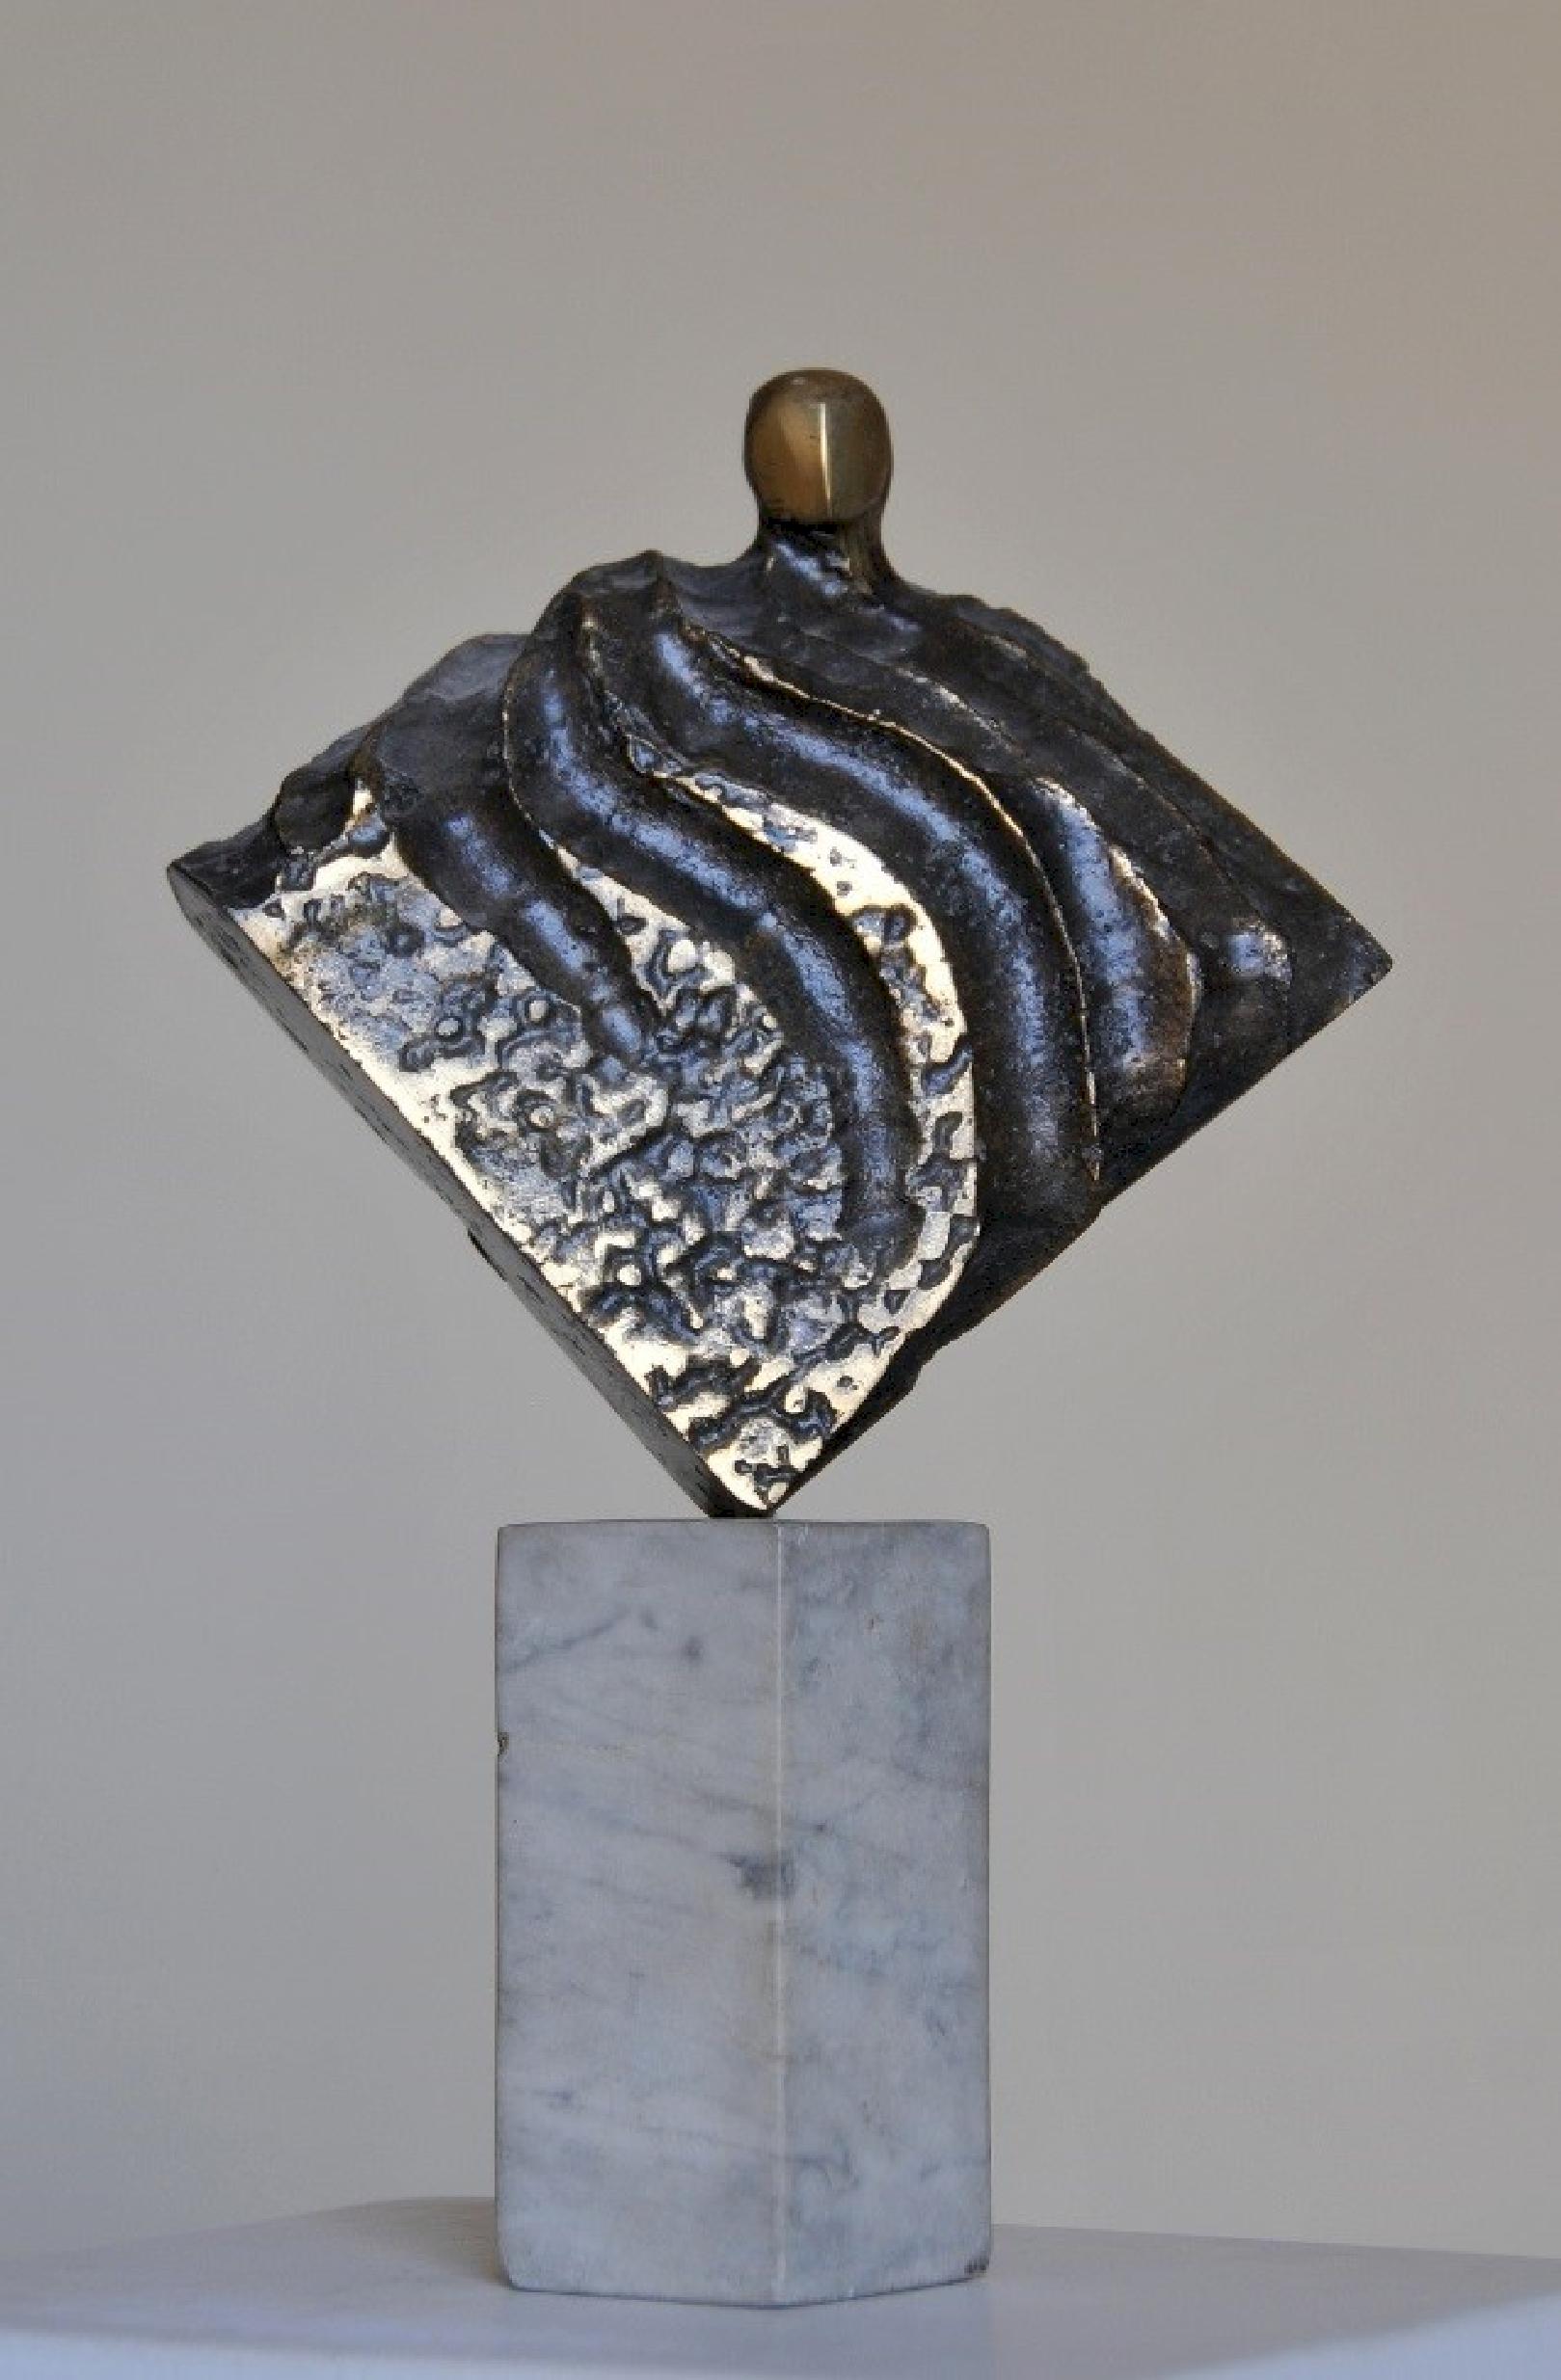 "Diamond" Bronze Sculpture 7" x 6.5" x 2" inch by Sarkis Tossonian


Sarkis Tossoonian was born in Alexandria in 1953. He graduated from the Faculty of Fine Arts/Sculpture in 1979. He started exhibiting in individual and group exhibitions in